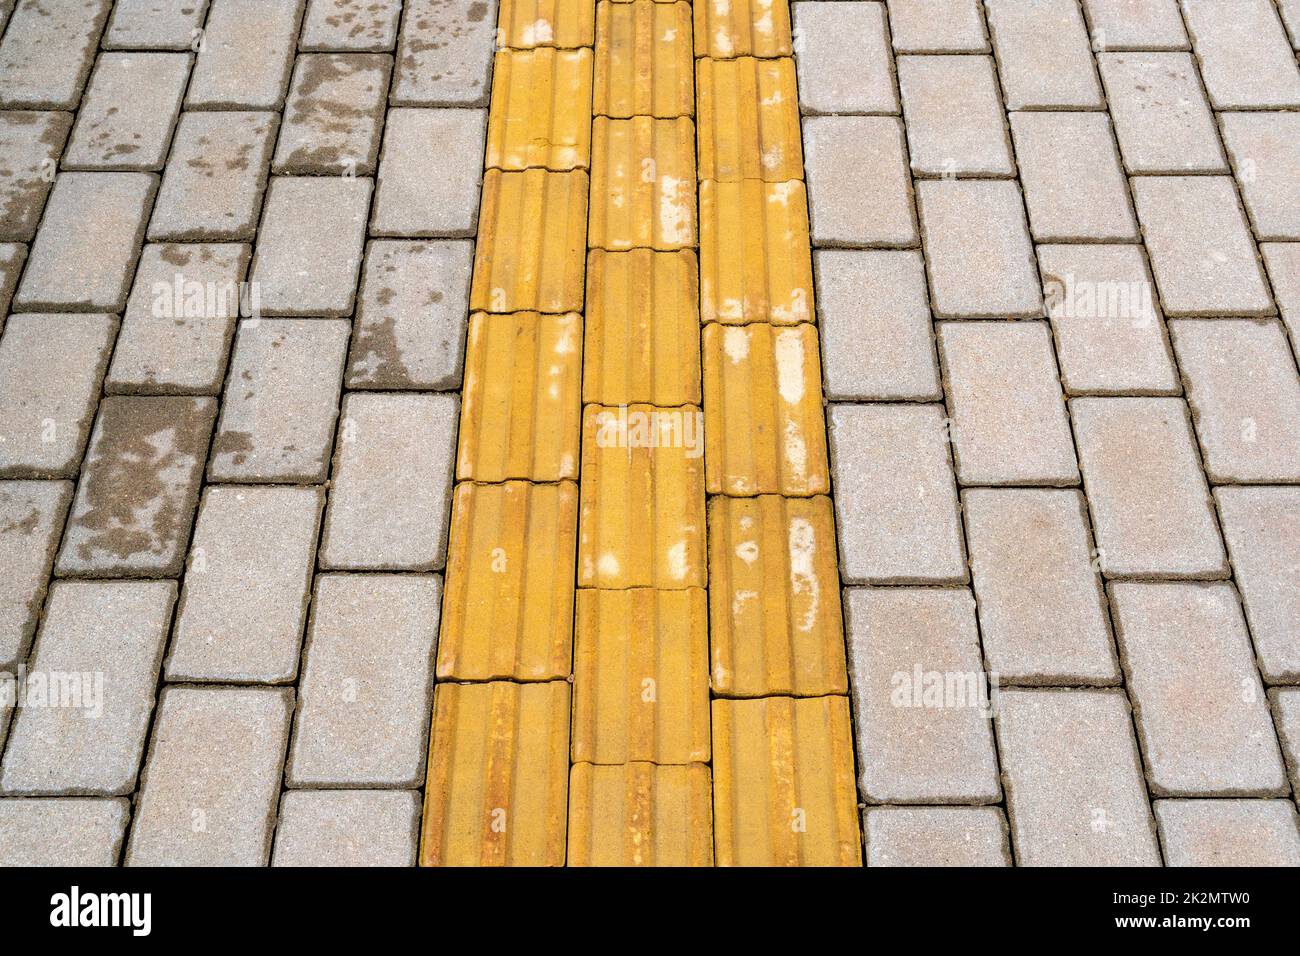 Tactile paving for blind handicap on tiles pathway Stock Photo